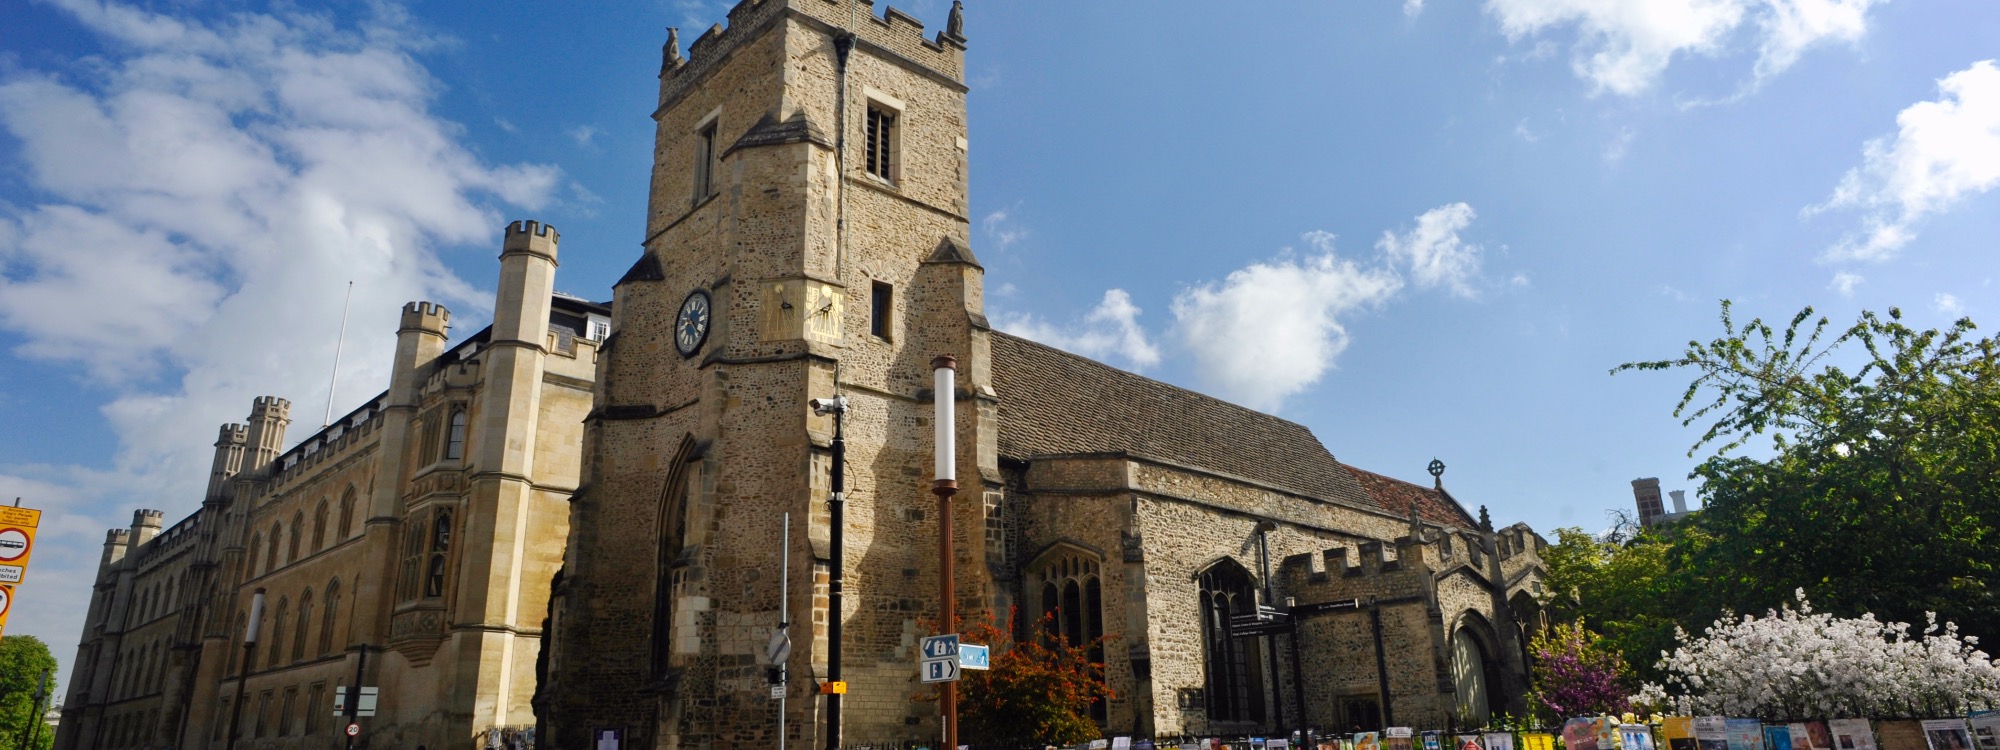 WELCOME*Celebrating over 700 years of worship at St Botolph's, Cambridge*ABOUT US